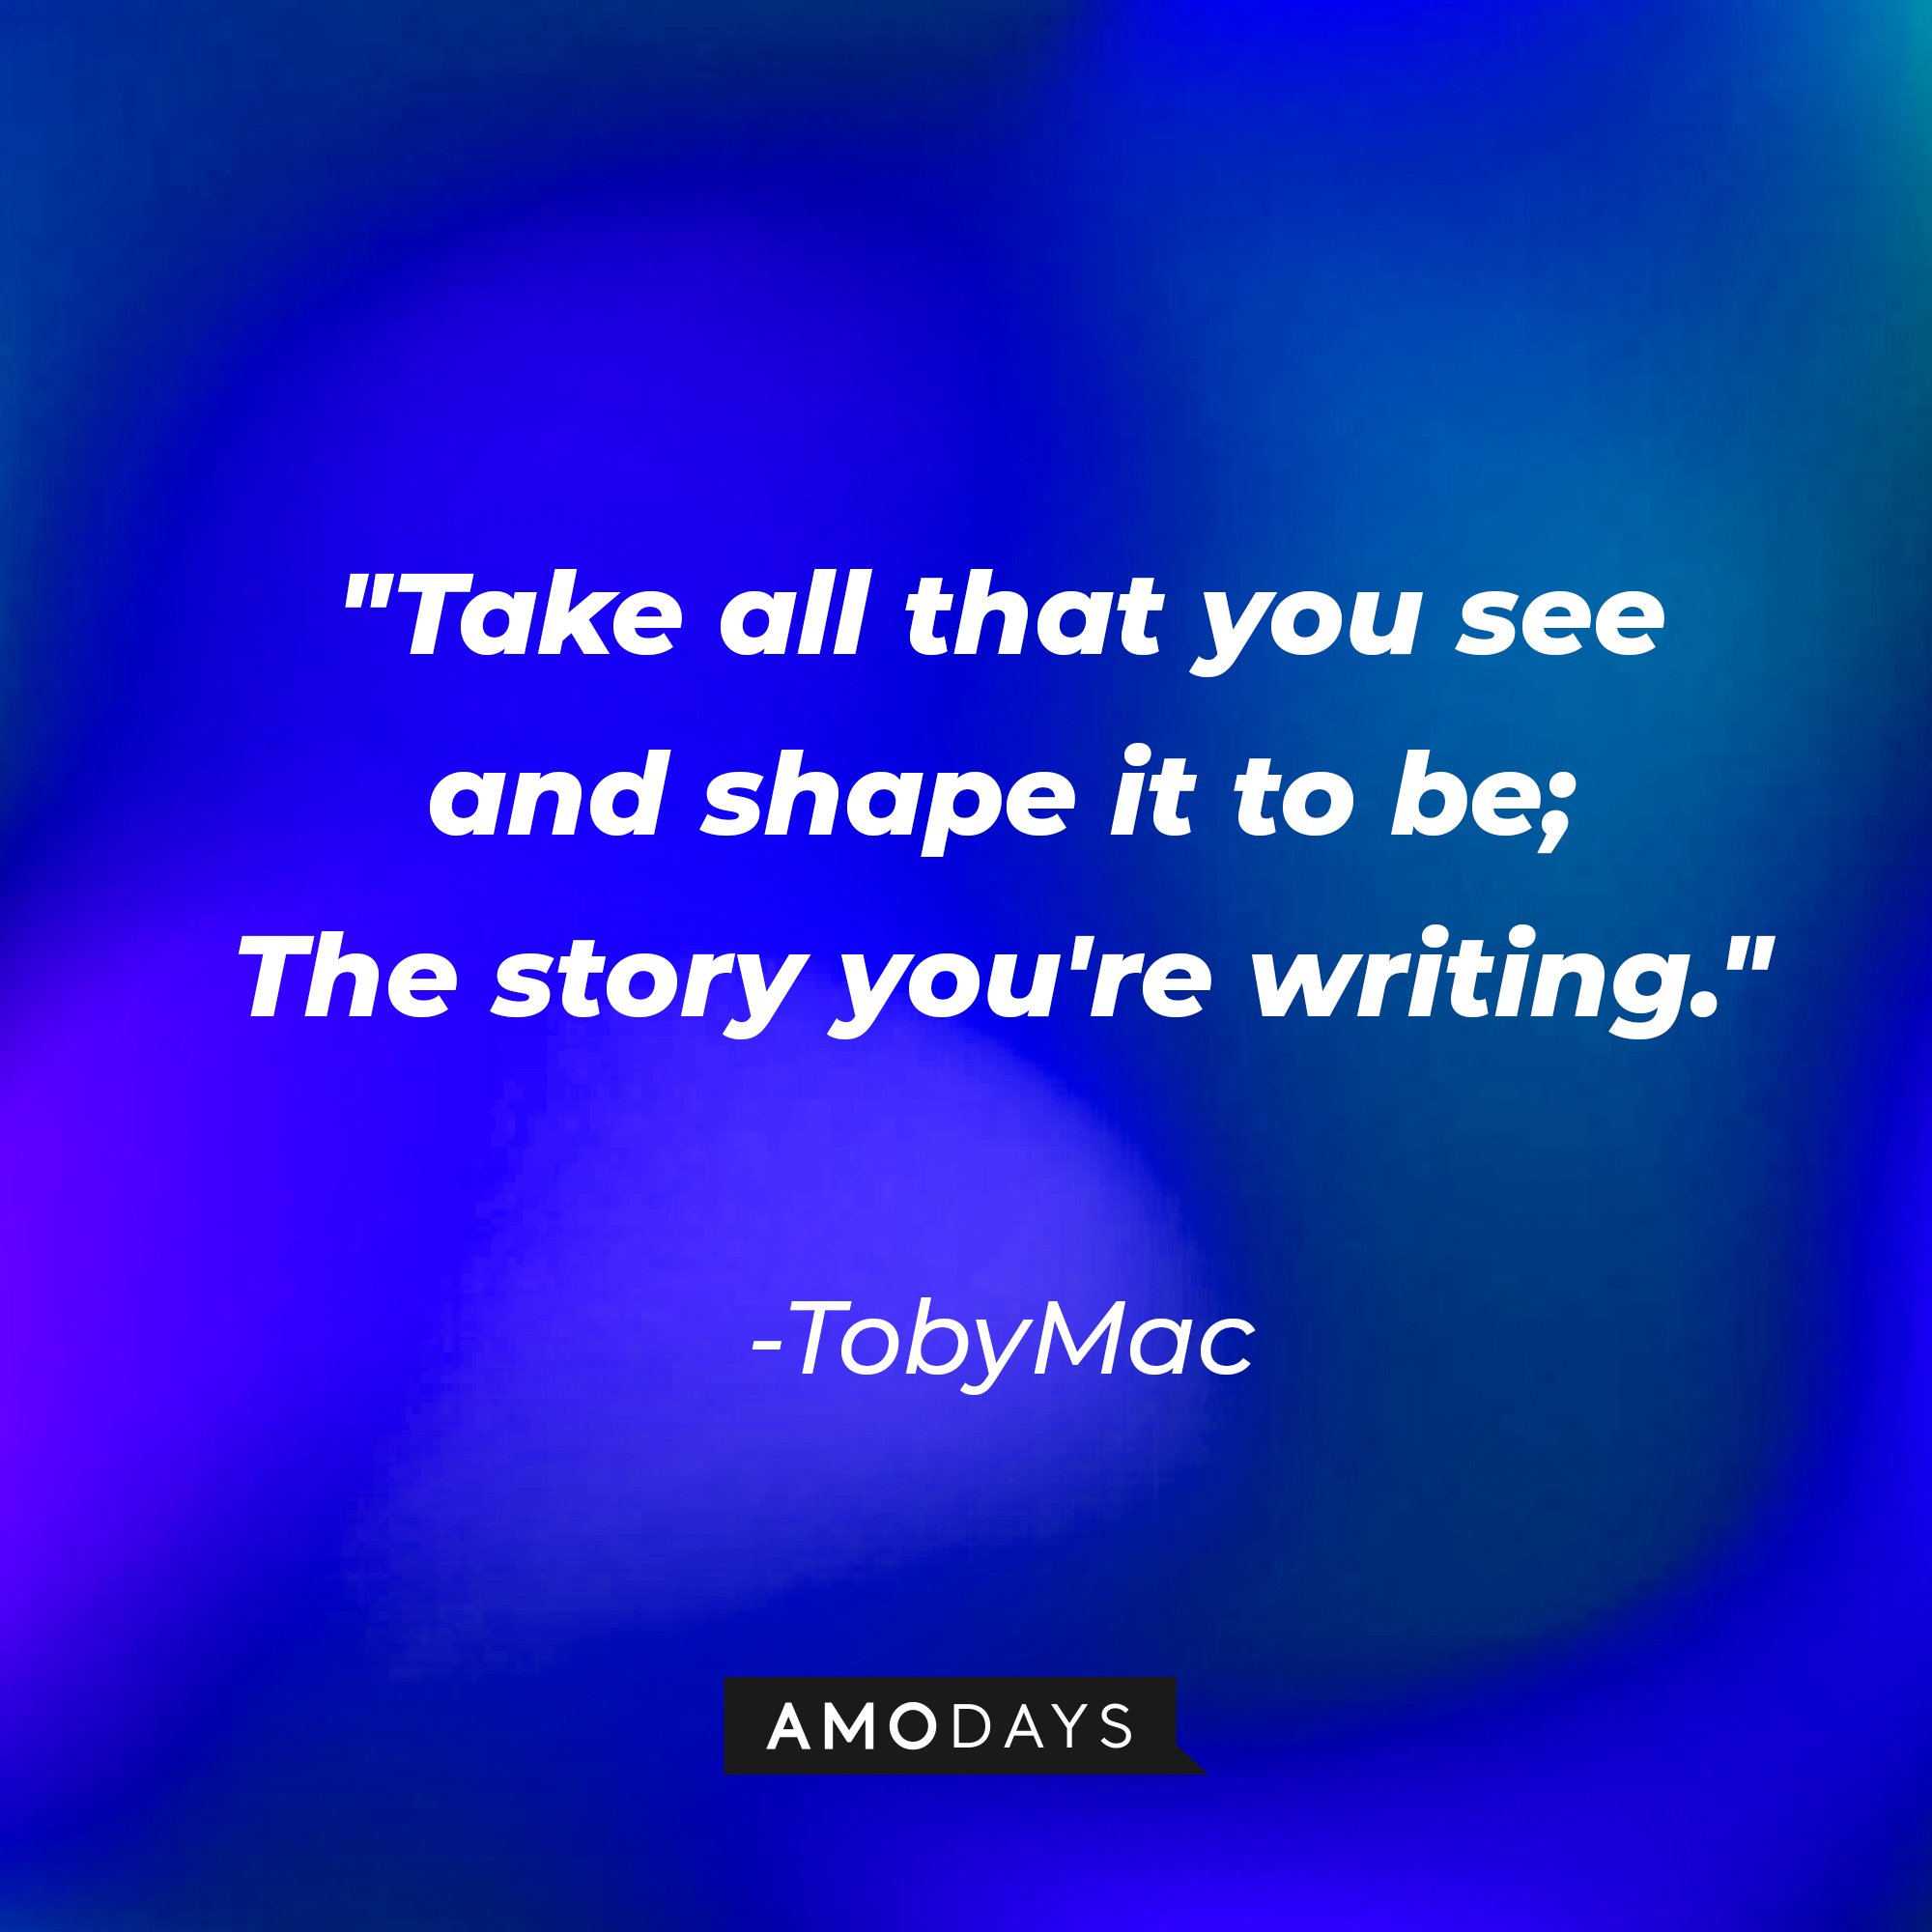 TobyMac's quote: "Take all that you see and shape it to be; The story you're writing." | Image: AmoDays